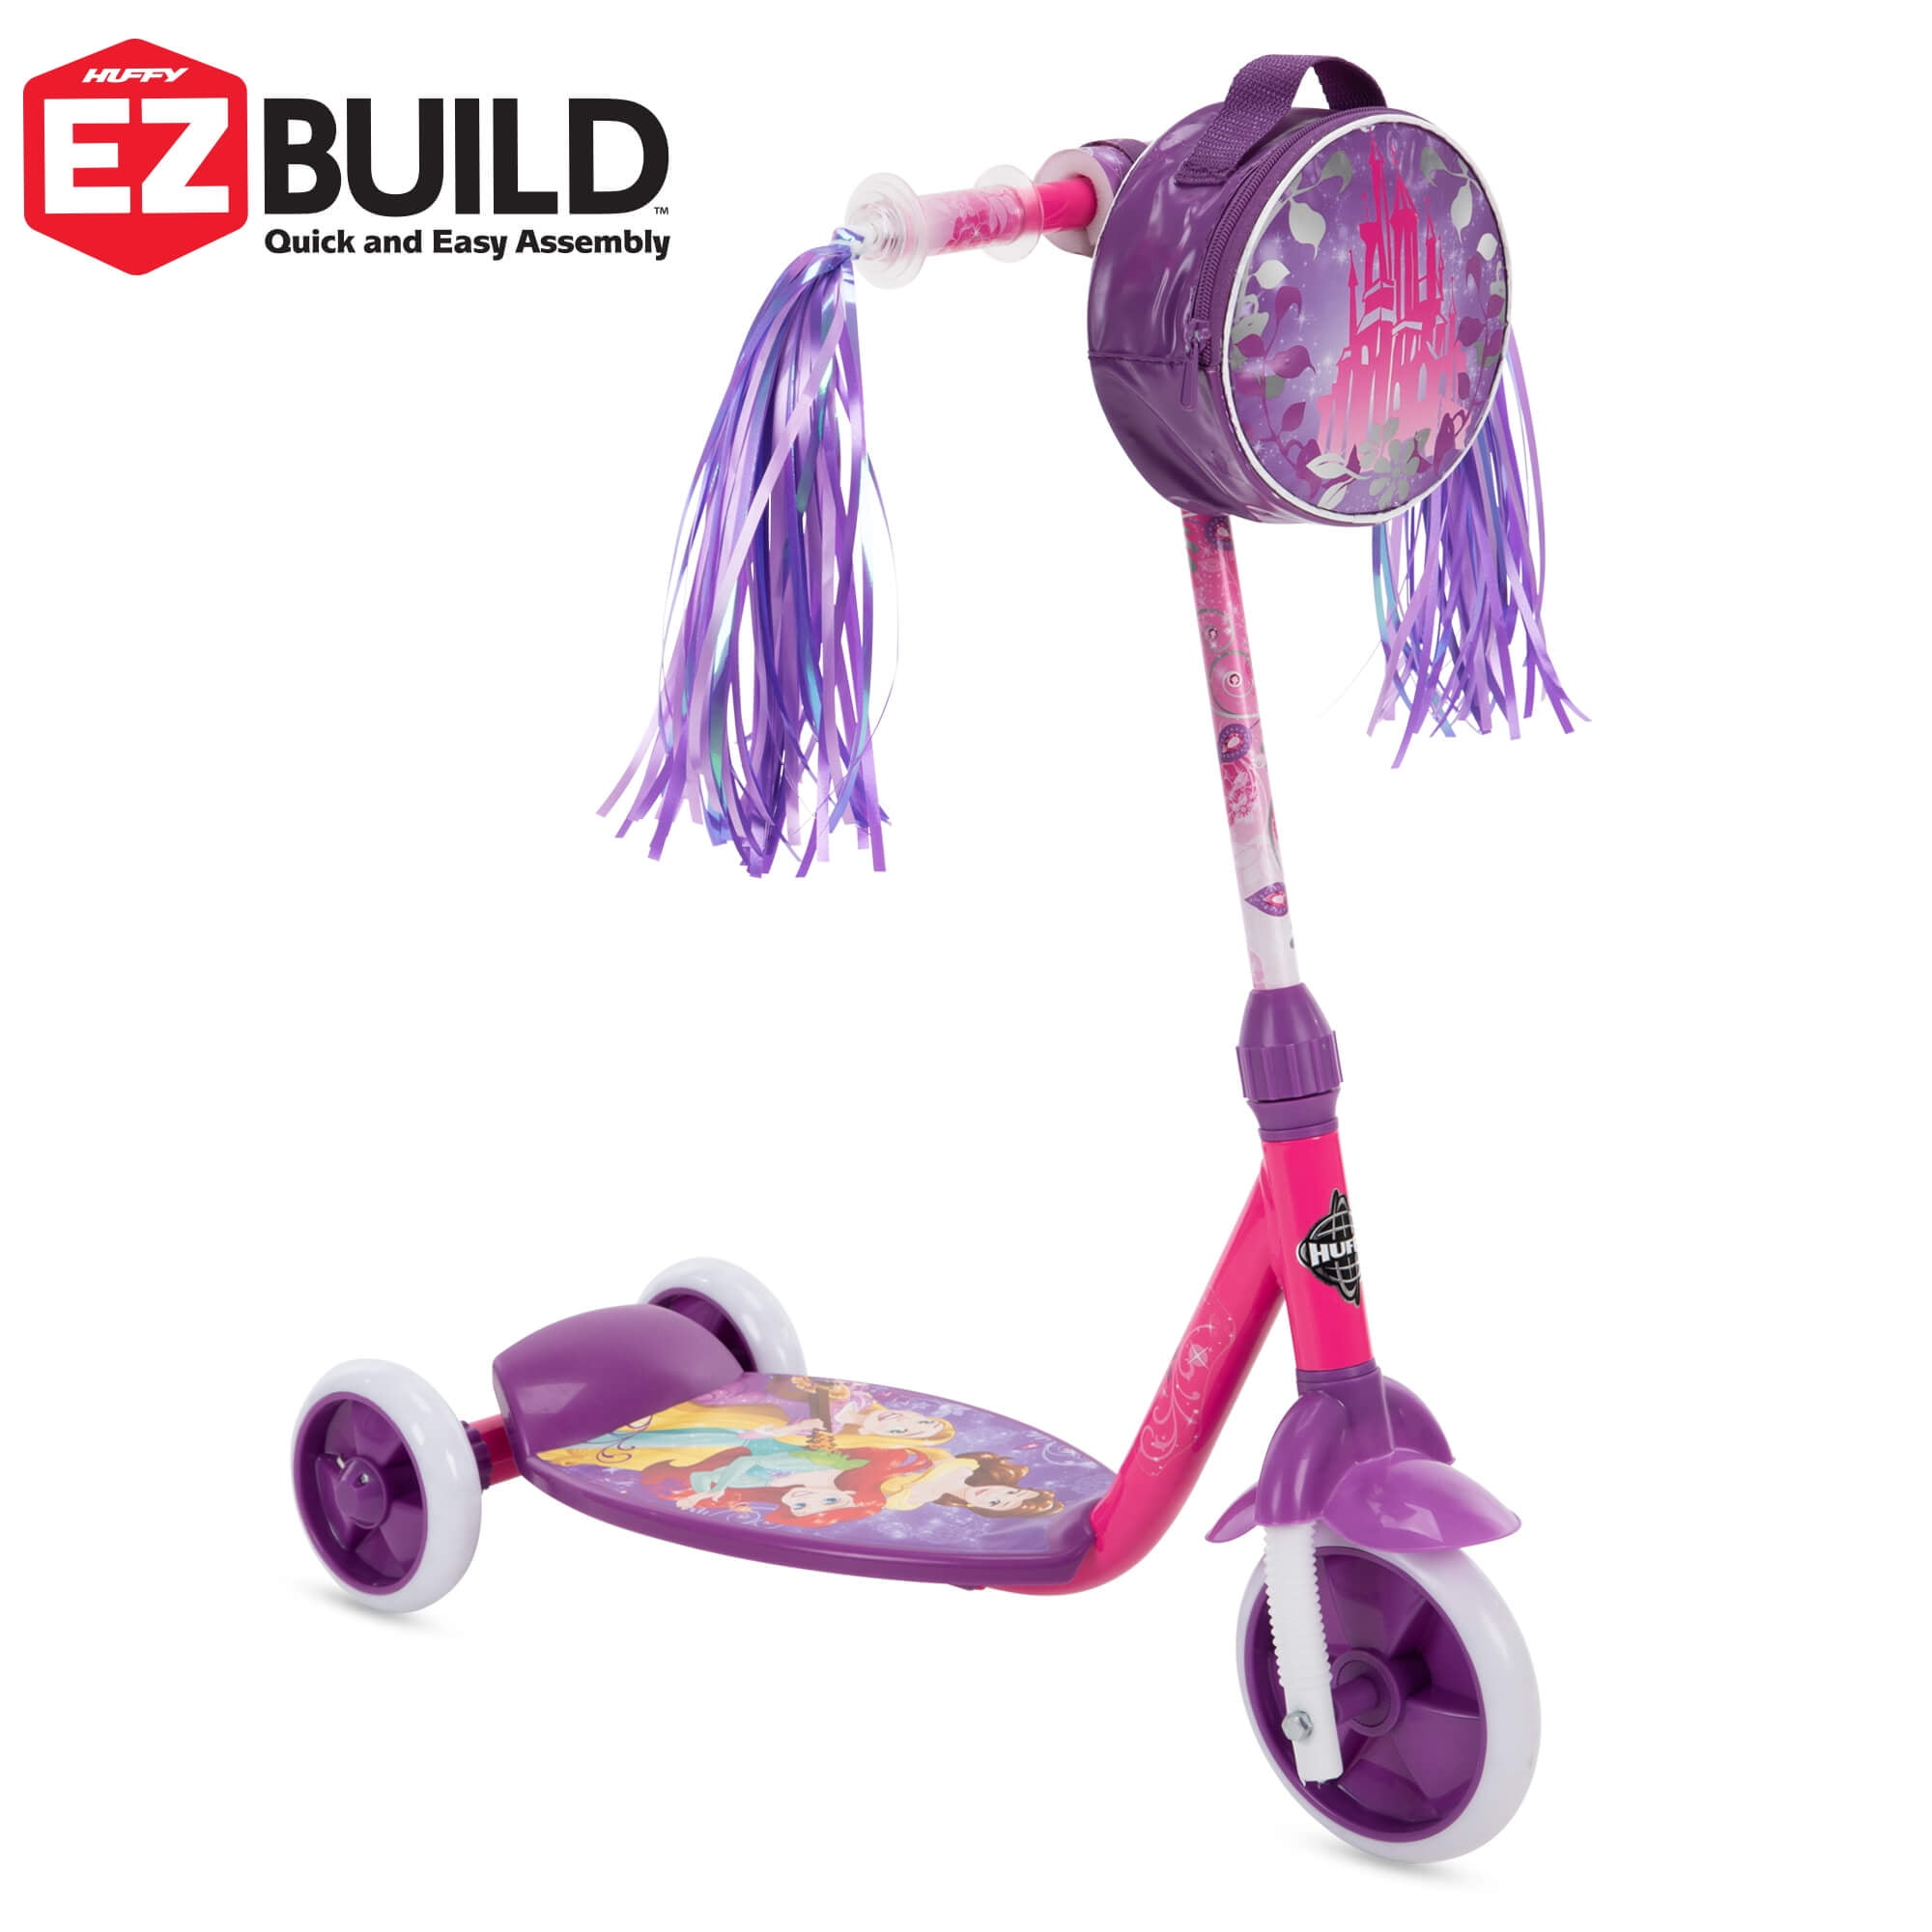 Disney Princess Girls' 3Wheel TriScooter for Kids by